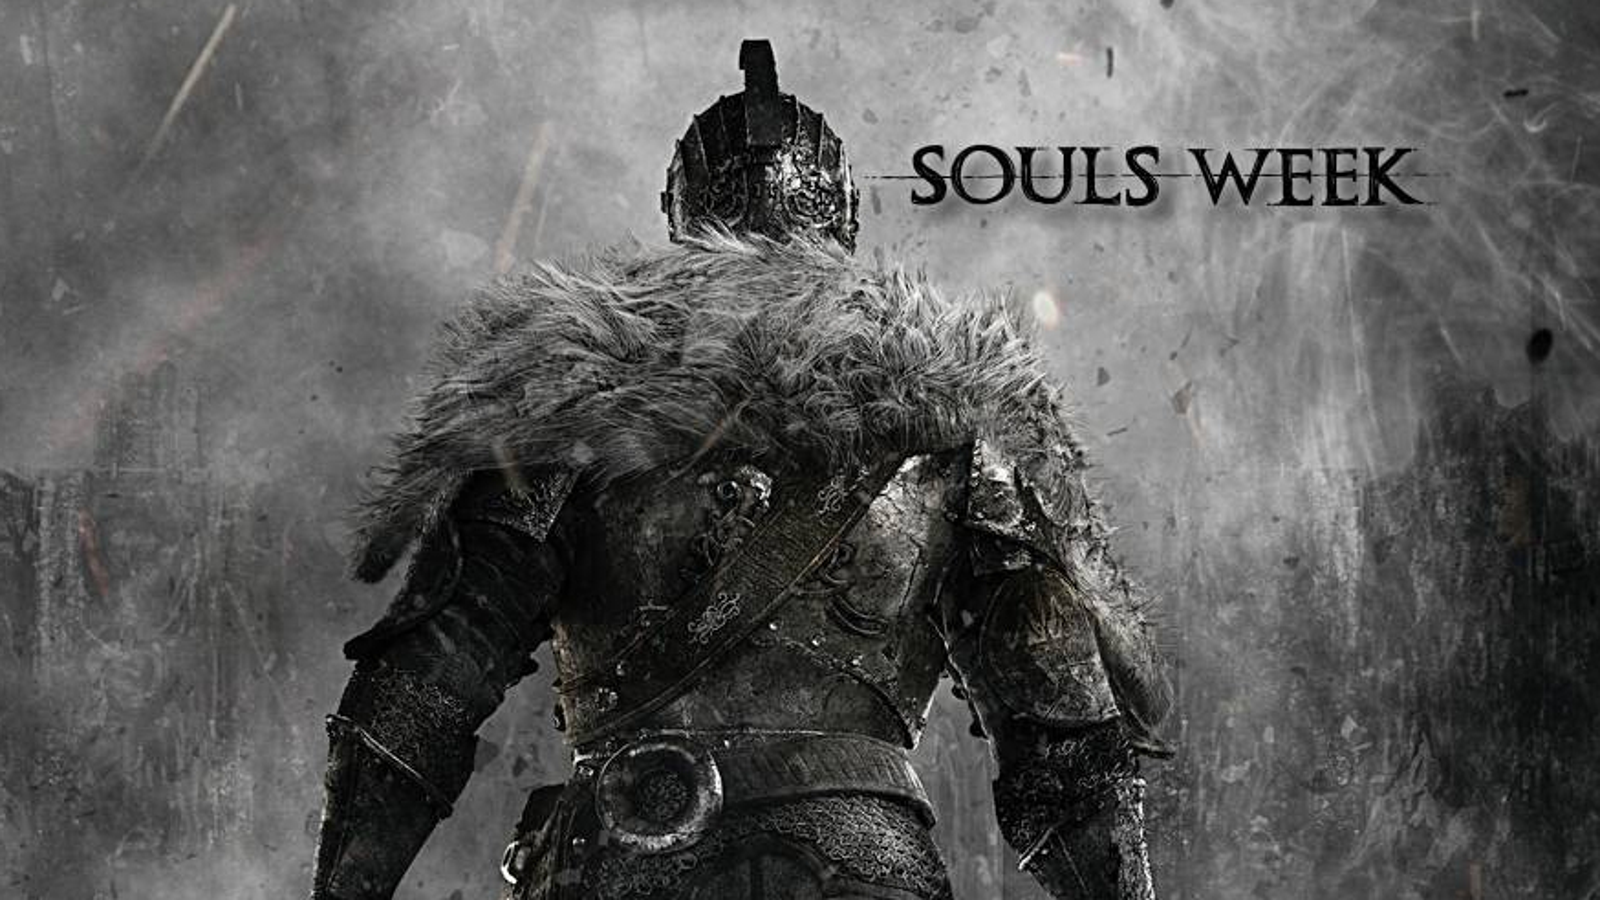 Dark Souls Gets the Ultimate Game of All Time Award